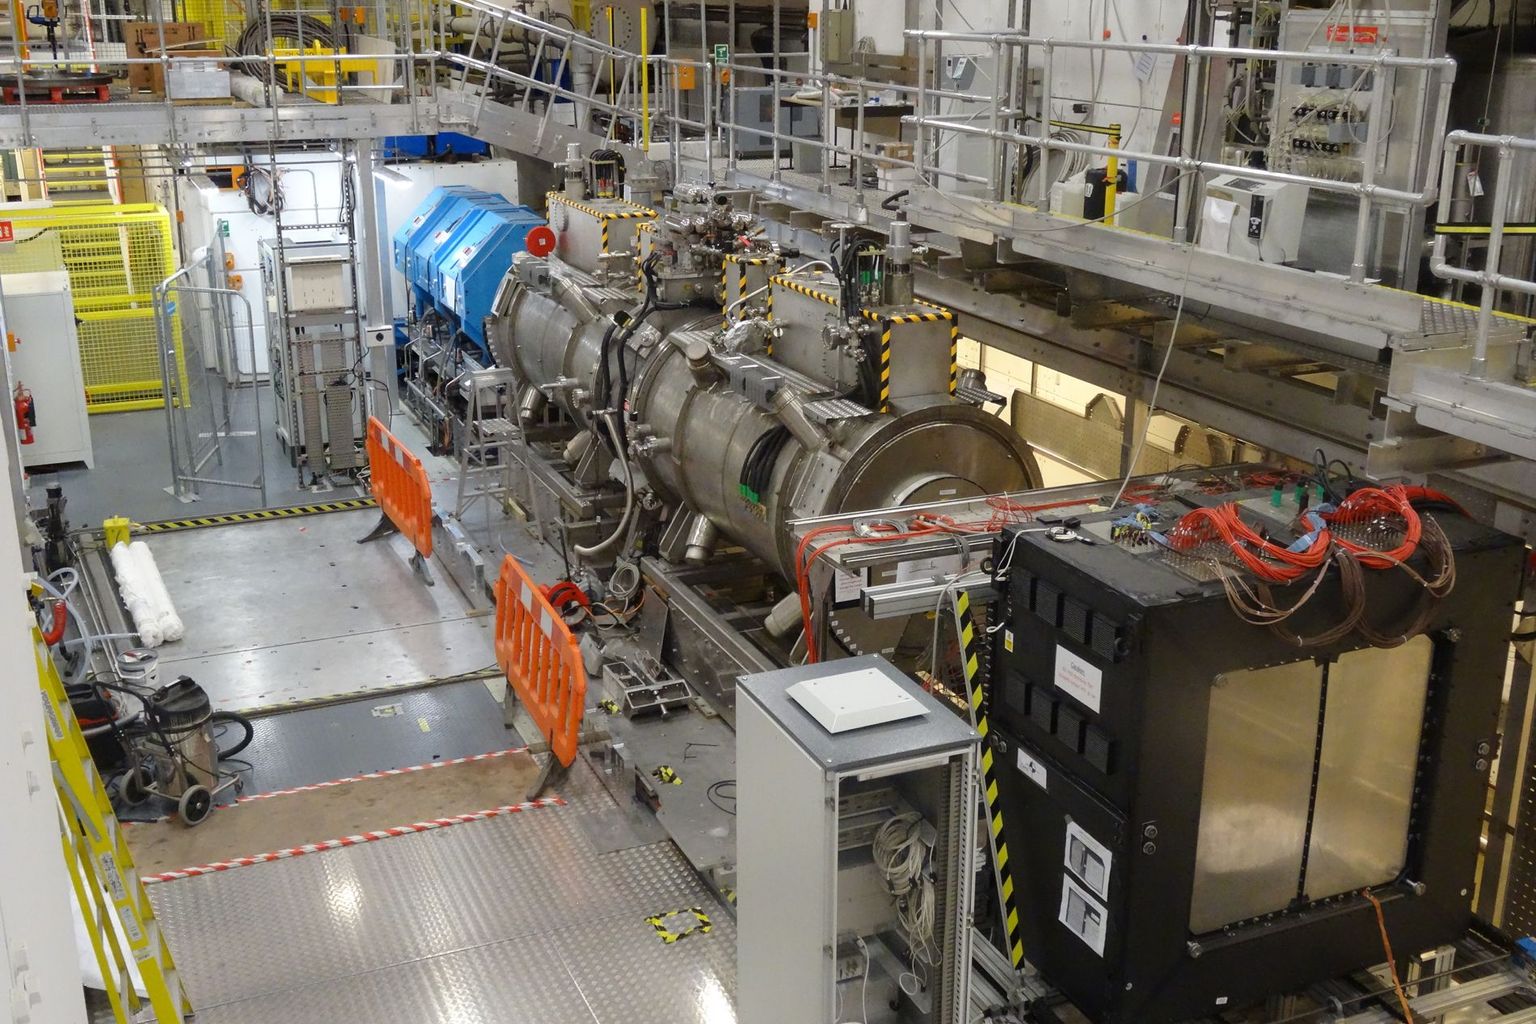 The Muon Ionization Cooling Experiment (MICE) was conducted at the Rutherford Appleton Laboratory in United Kingdom.